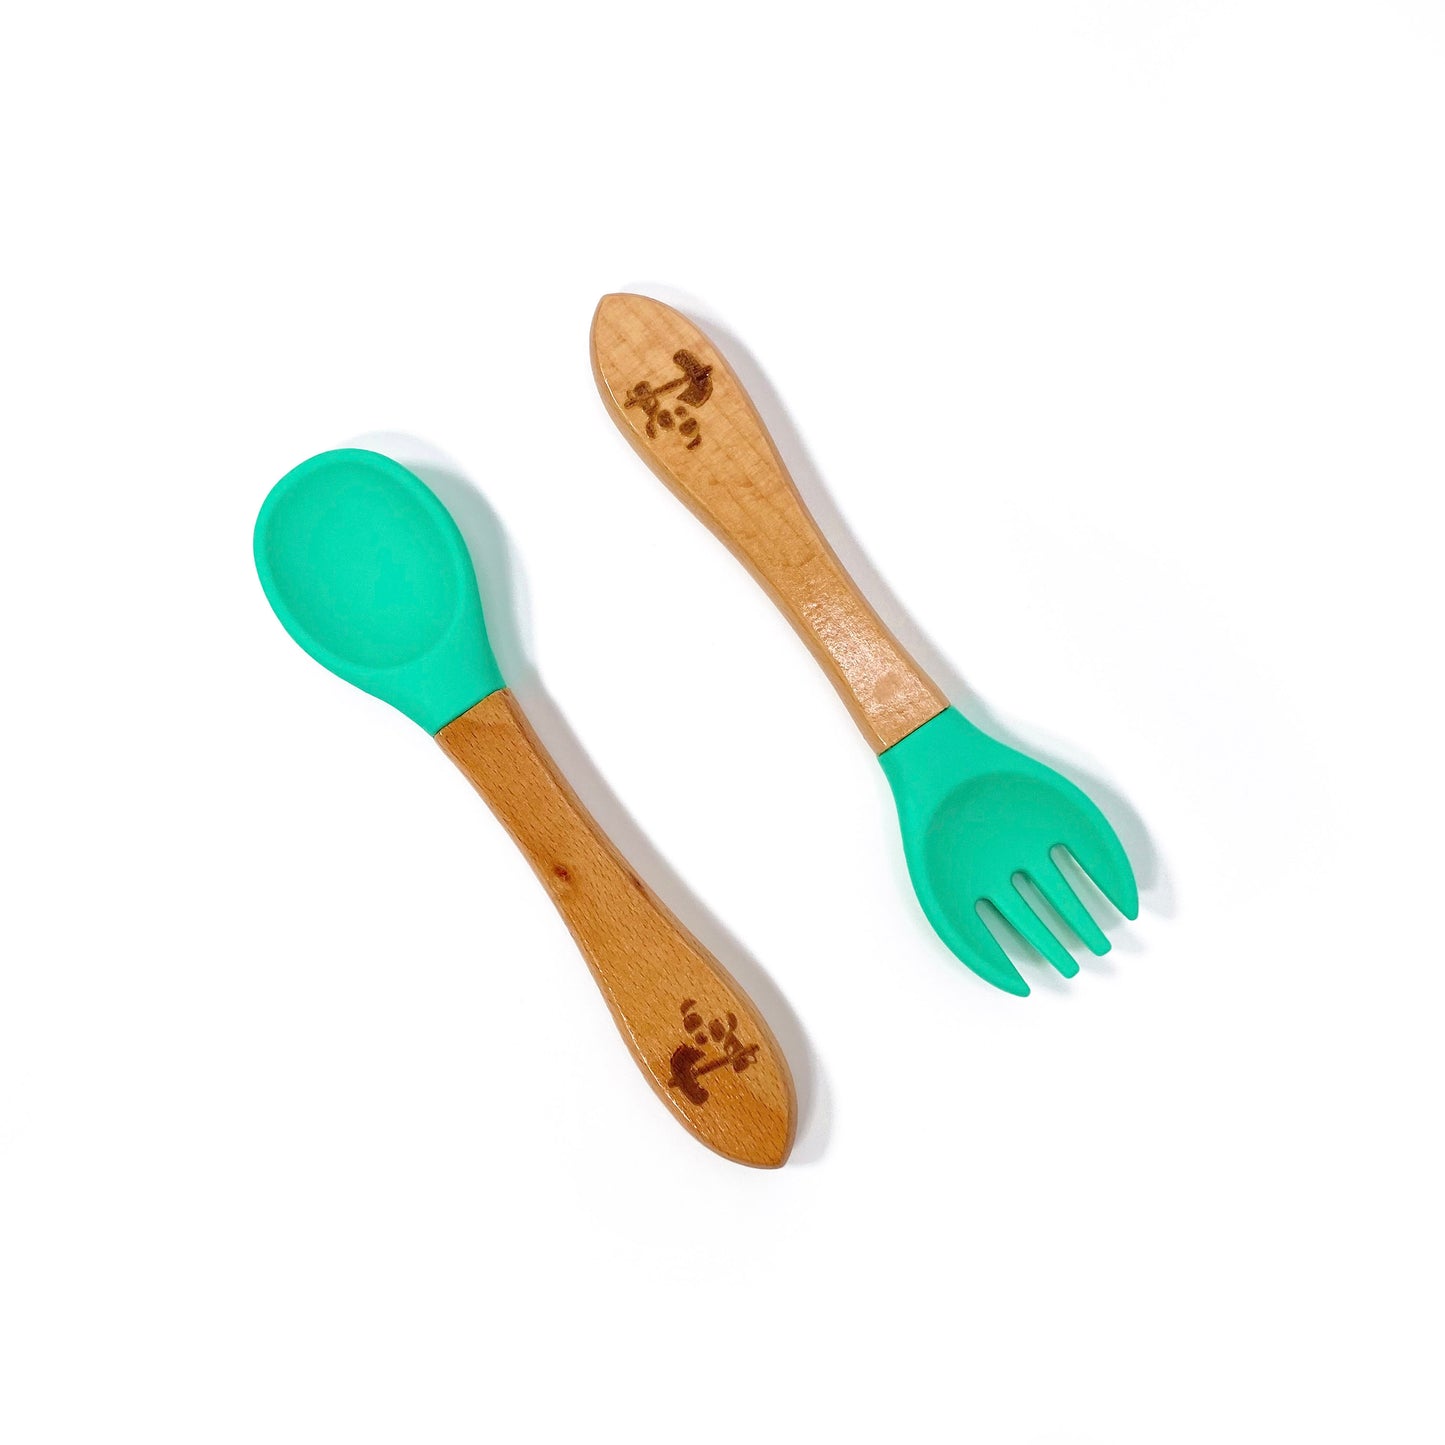 shows the underside of the plate. A set of children’s bamboo and silicone cutlery, in seafoam green. The set is comprised of a fork and spoon.